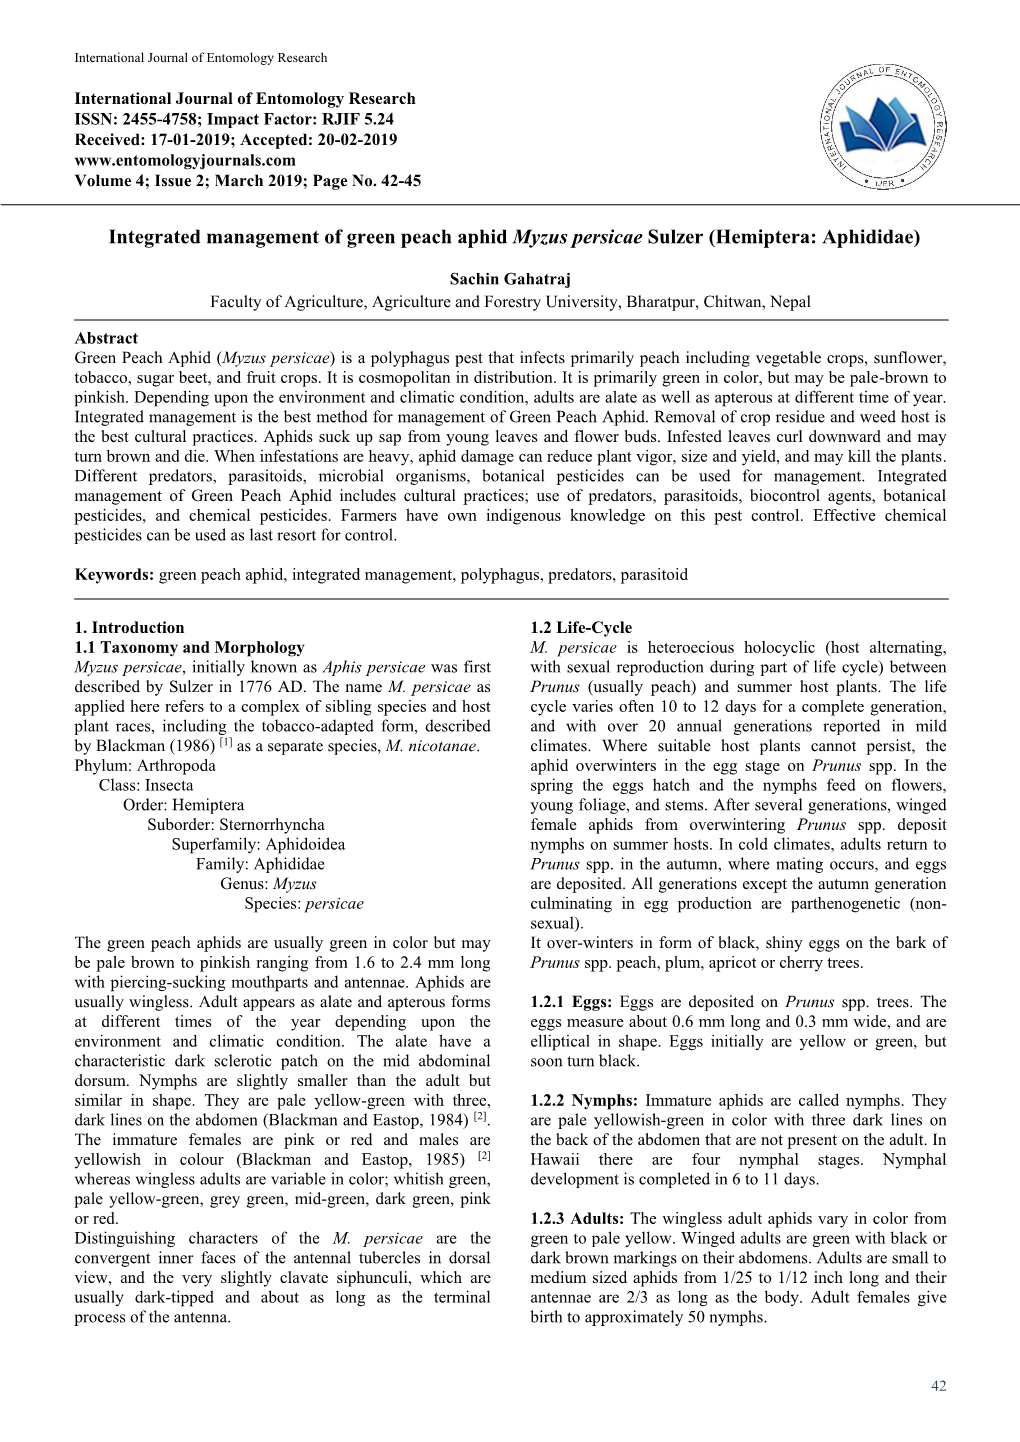 Integrated Management of Green Peach Aphid Myzus Persicae Sulzer (Hemiptera: Aphididae)